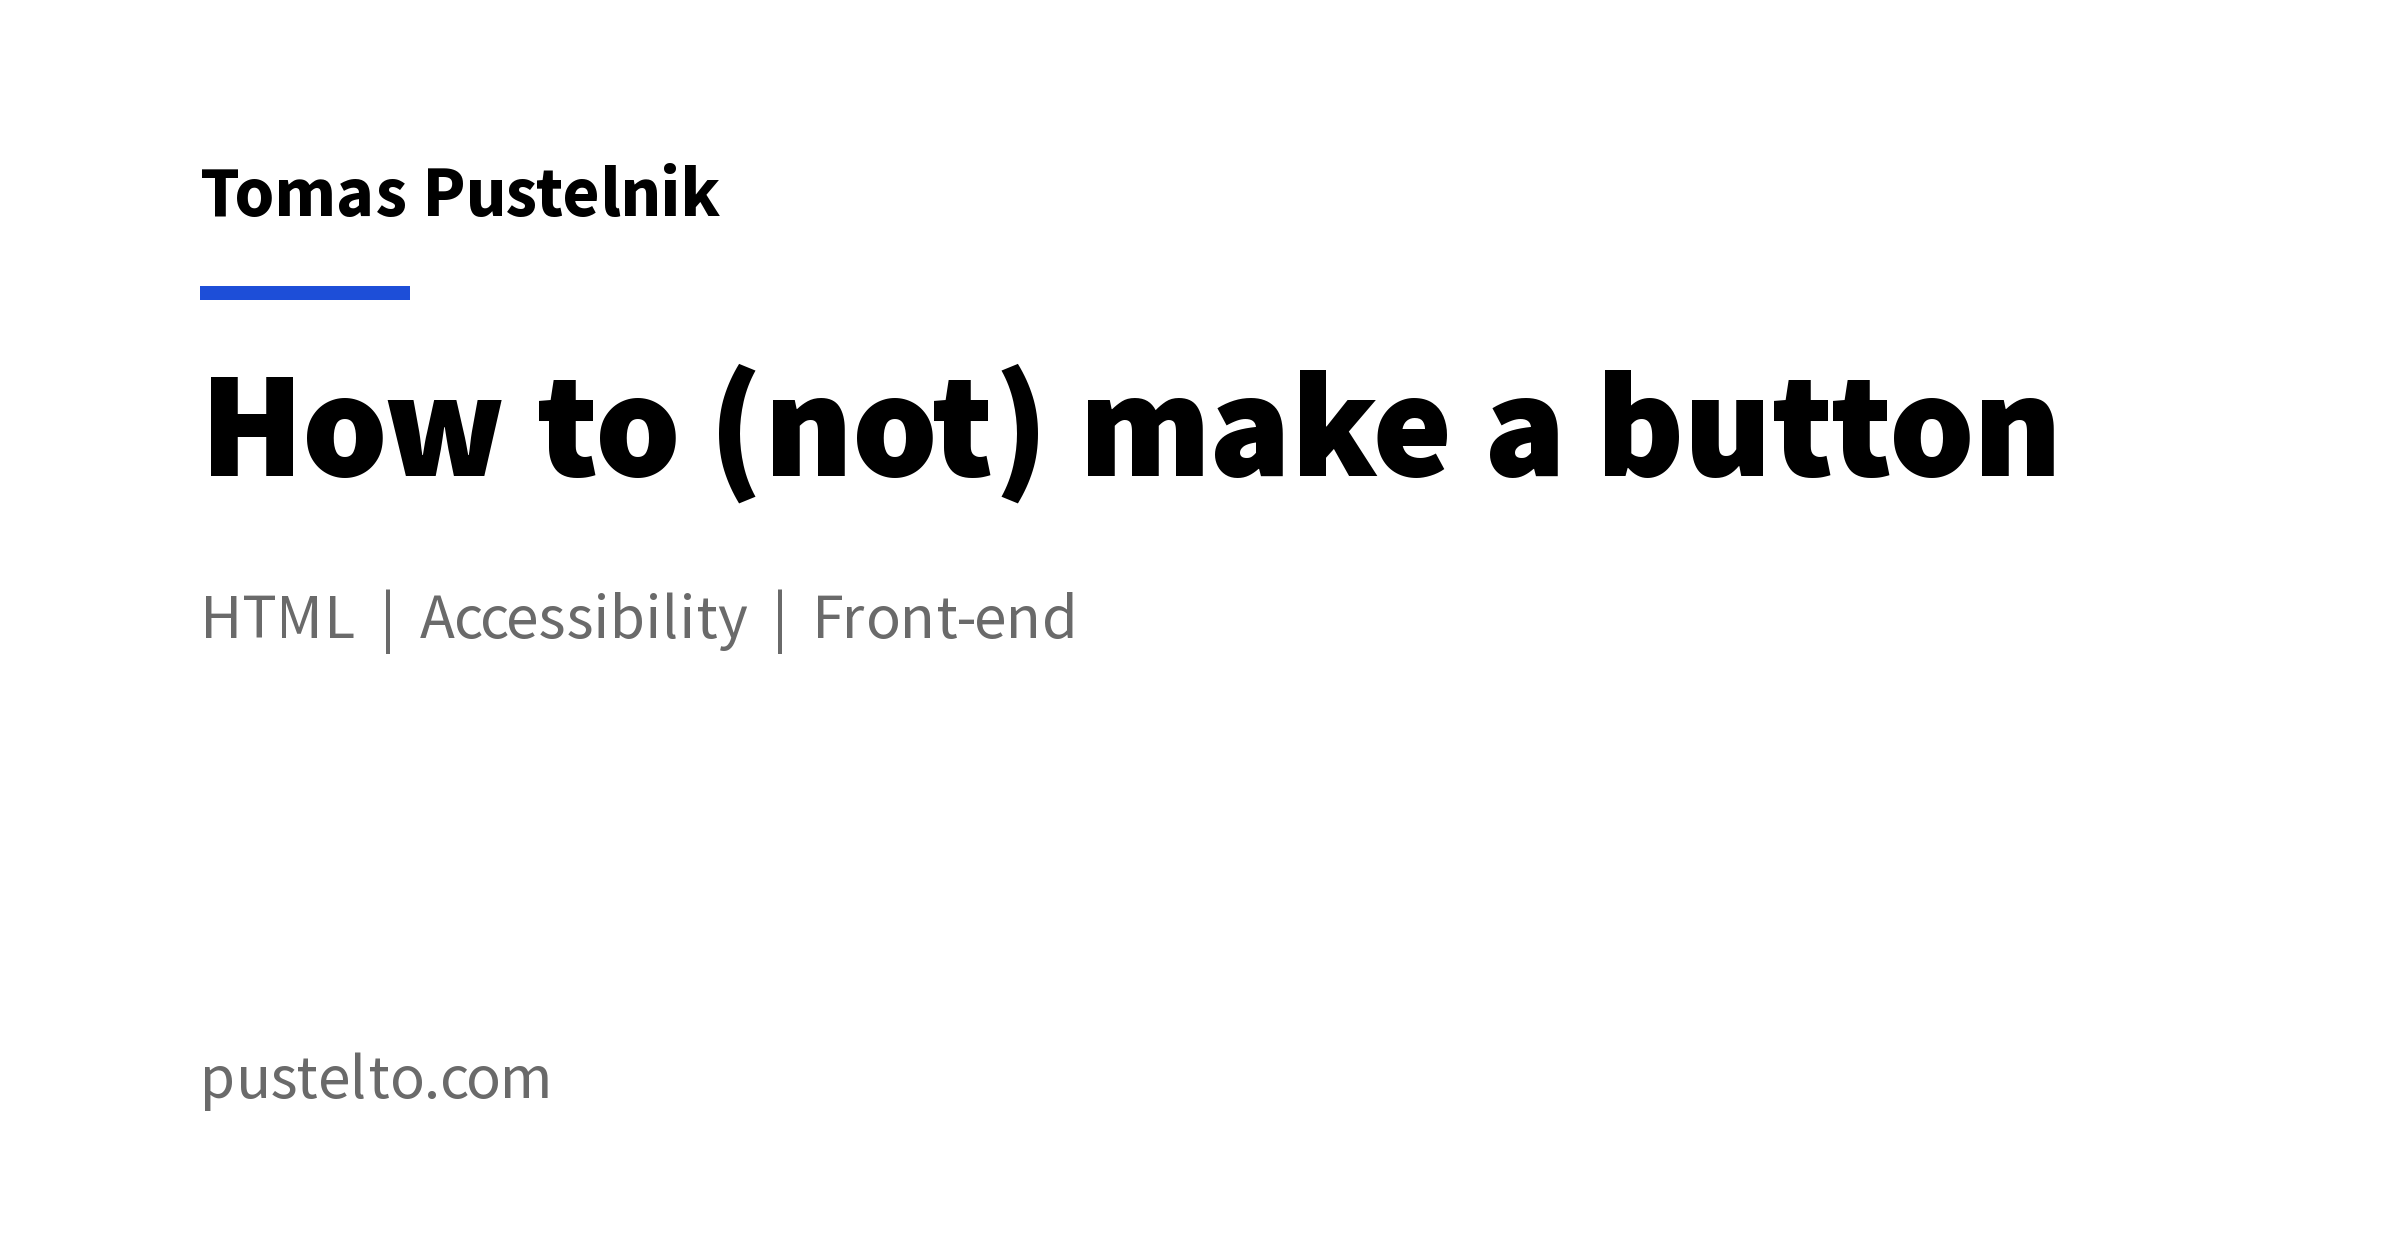 How to (not) make a button - Tomas Pustelnik’s personal website